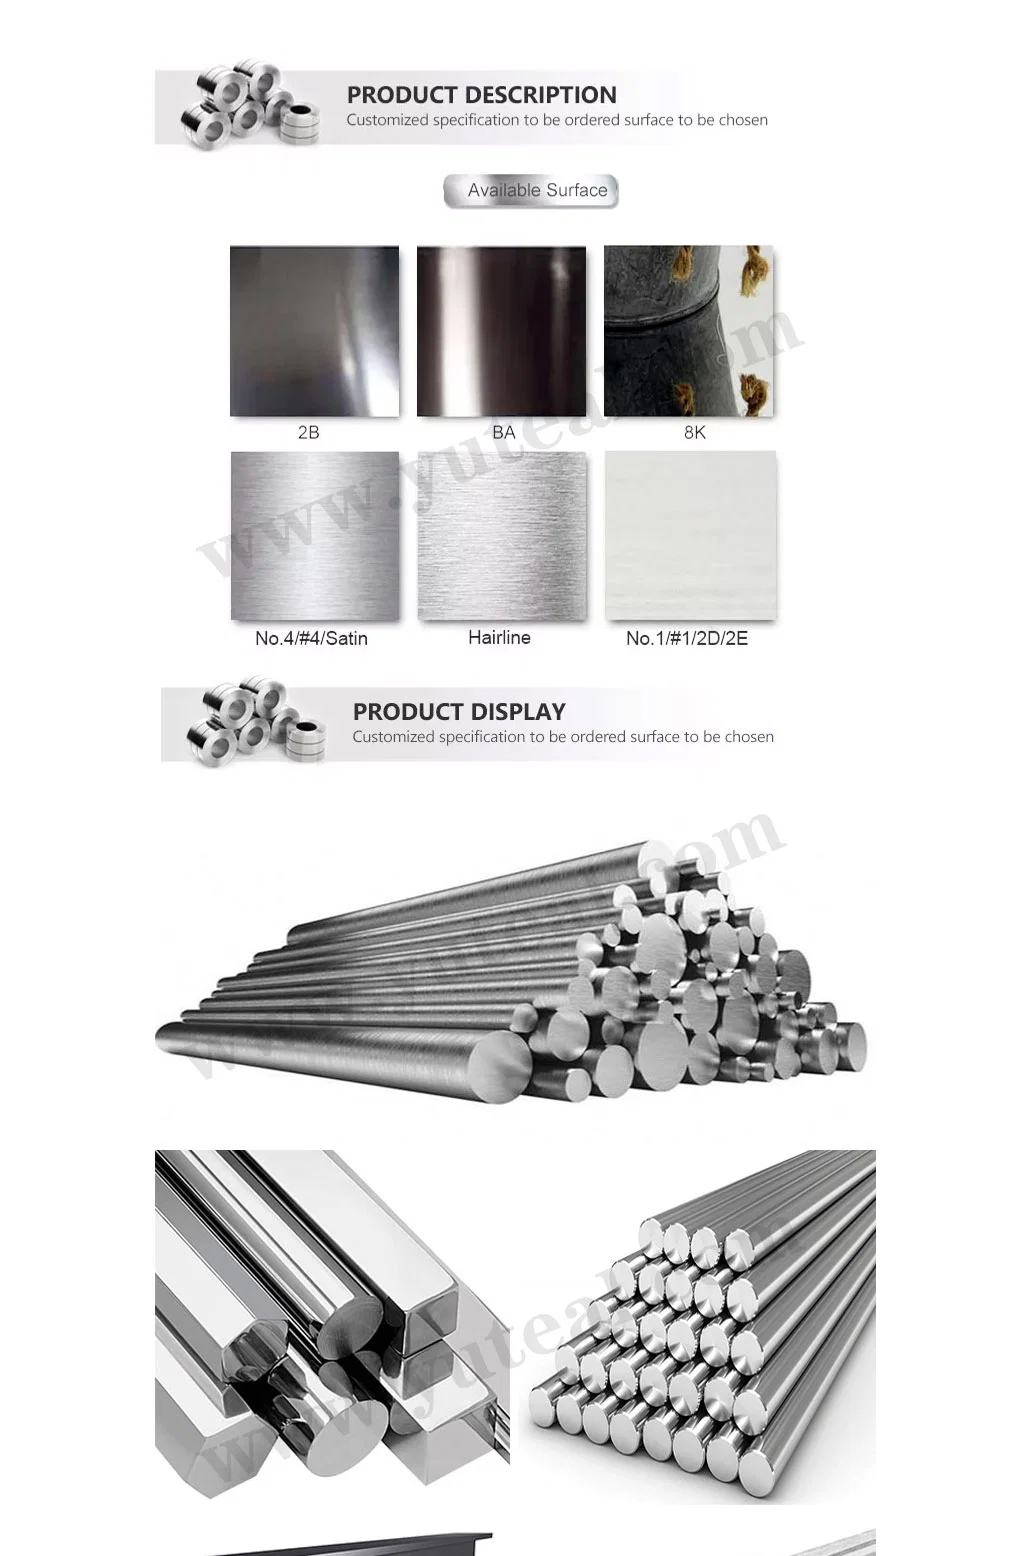 High Quality Stainless Steel 1cr17ni7 12cr17ni7 S30409 SUS301 301 Round Bar Manufacturer, Stainless Steel Round Bar